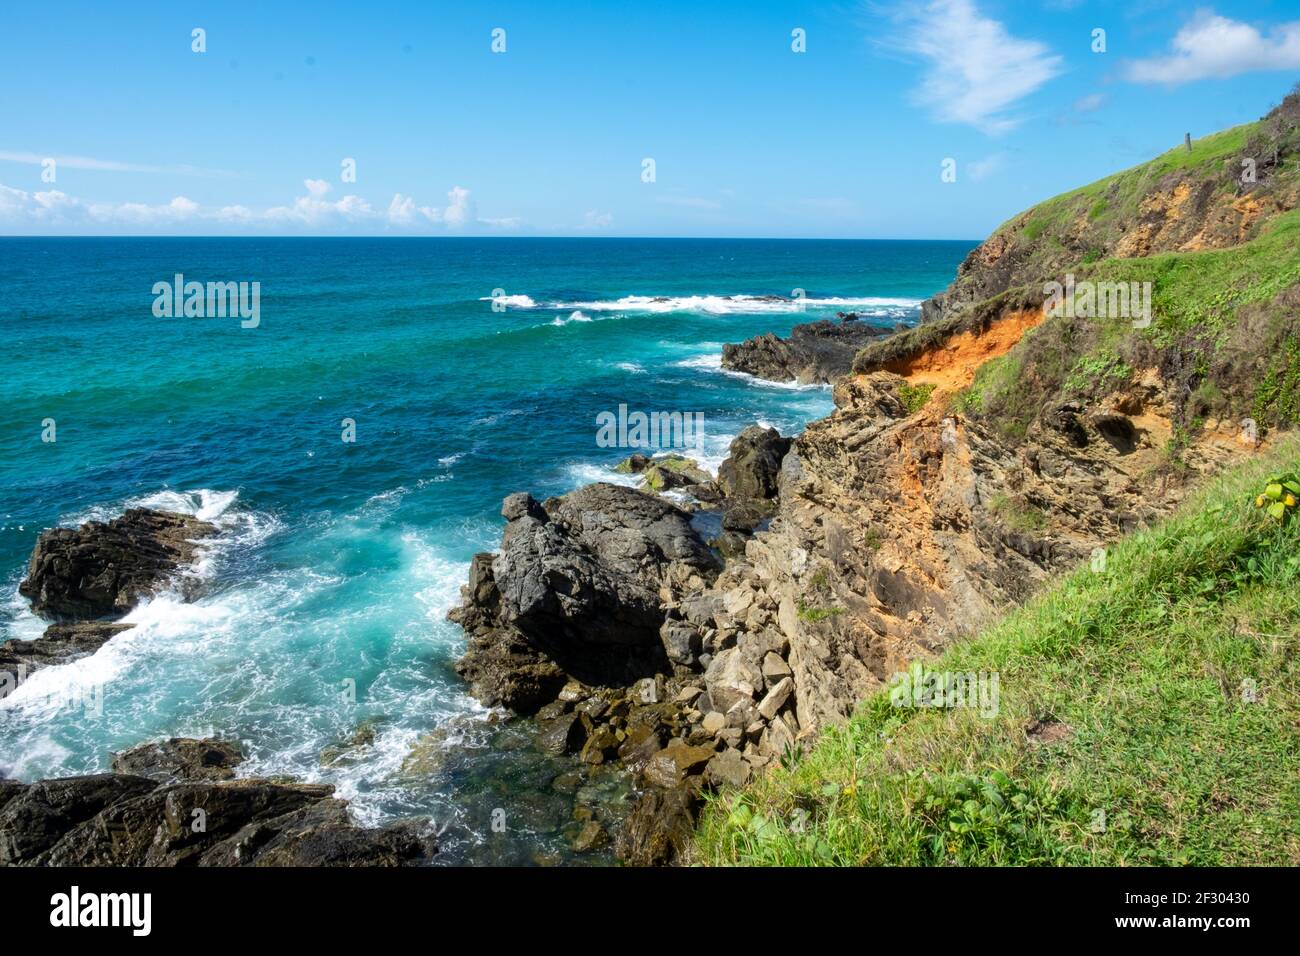 Waves breaking on rocks and cliffs Stock Photo